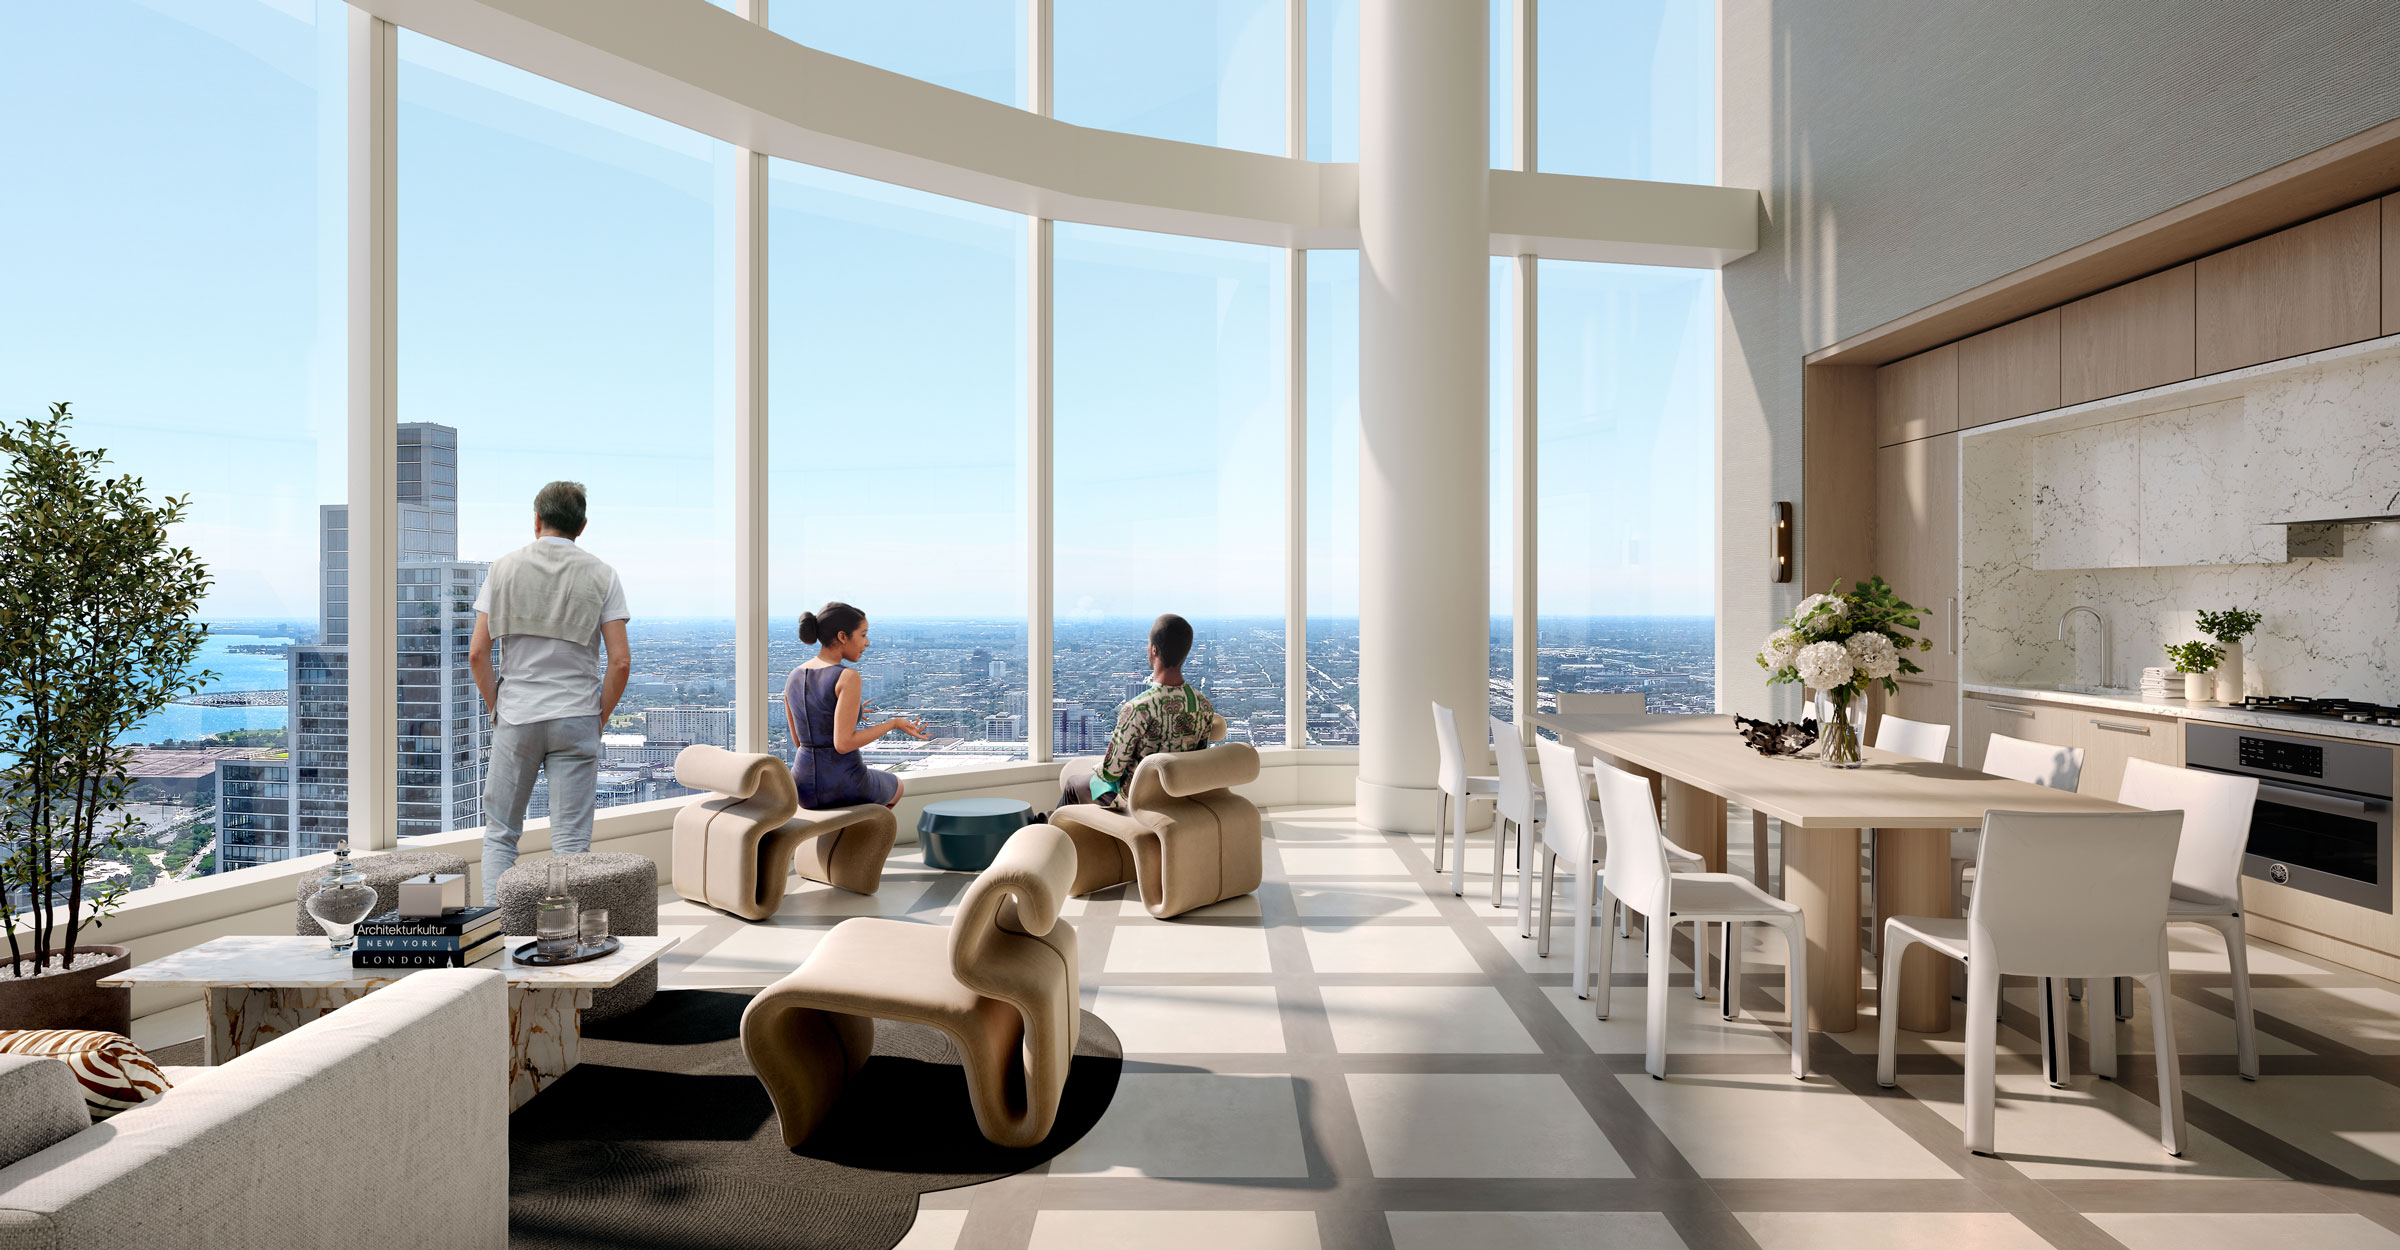 1000M Rooftop Observation Dining Lounge with people overlooking the city skyline and lake, designer furniture and kitchen.